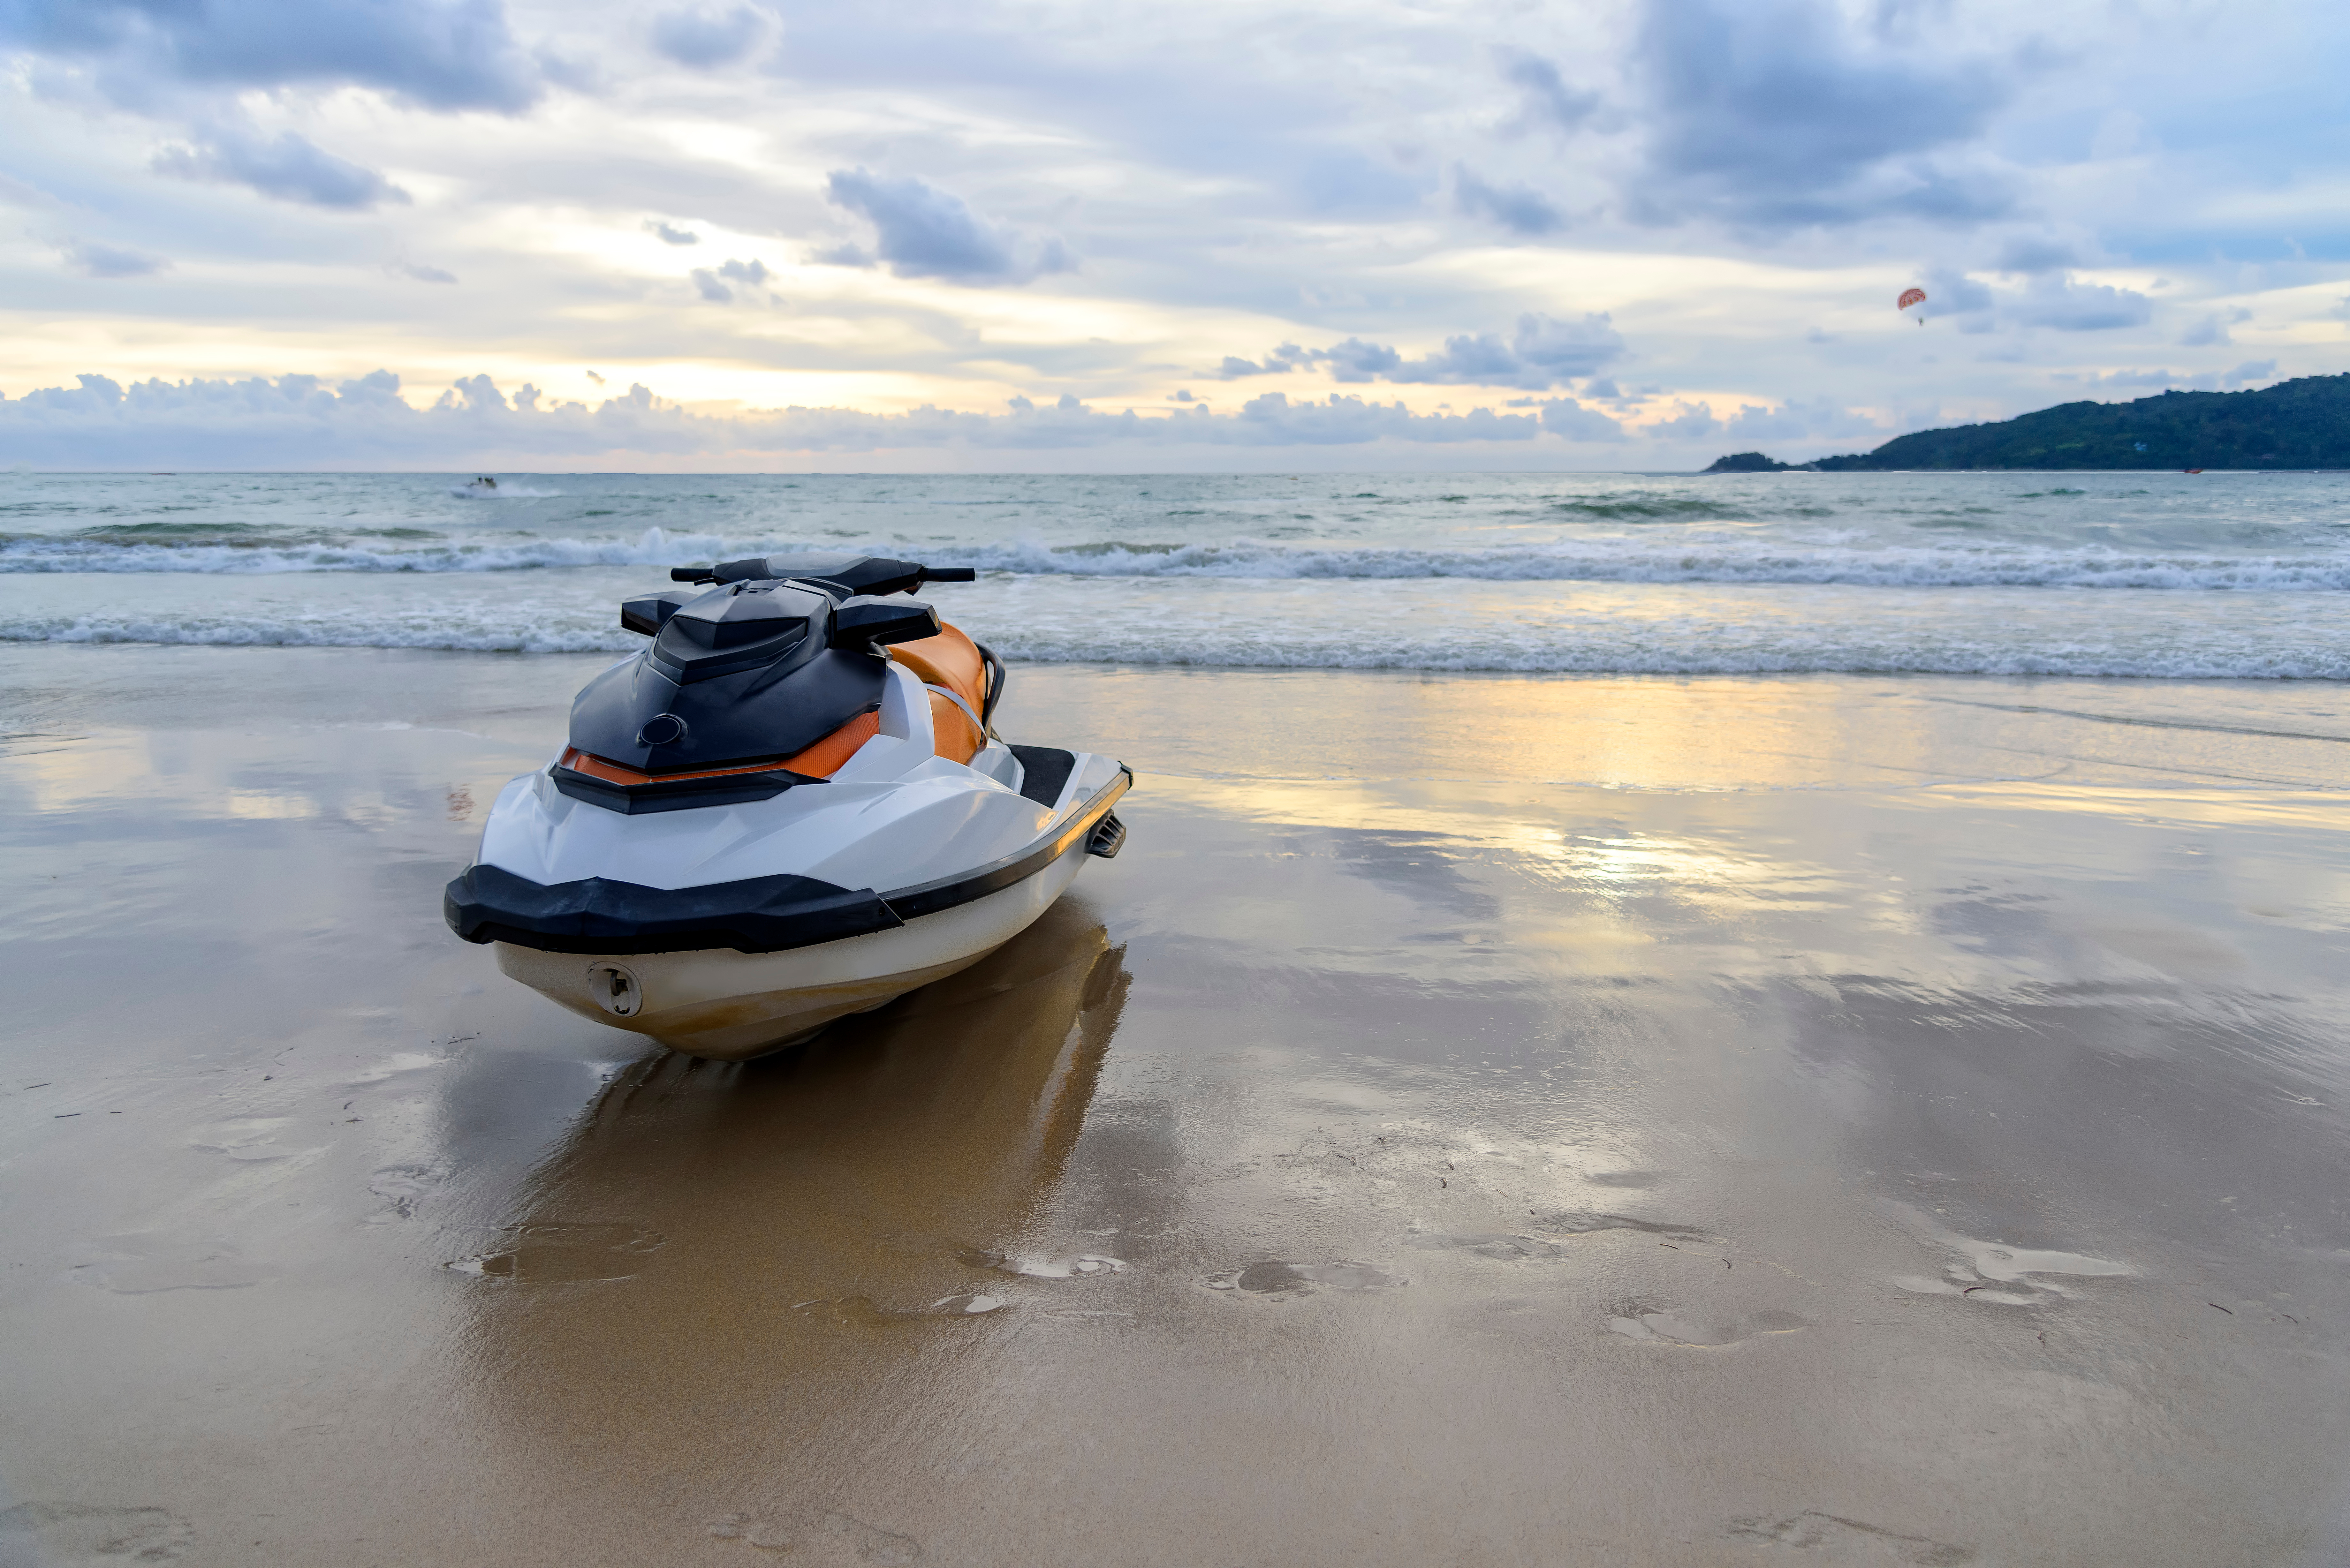 A white and yellow jet-ski on the shore's wet sand, with the ocean and a small bit of land in the background, posing the question, What is the process for handling unprotected property in a chapter 7 bankruptcy in Minnesota?